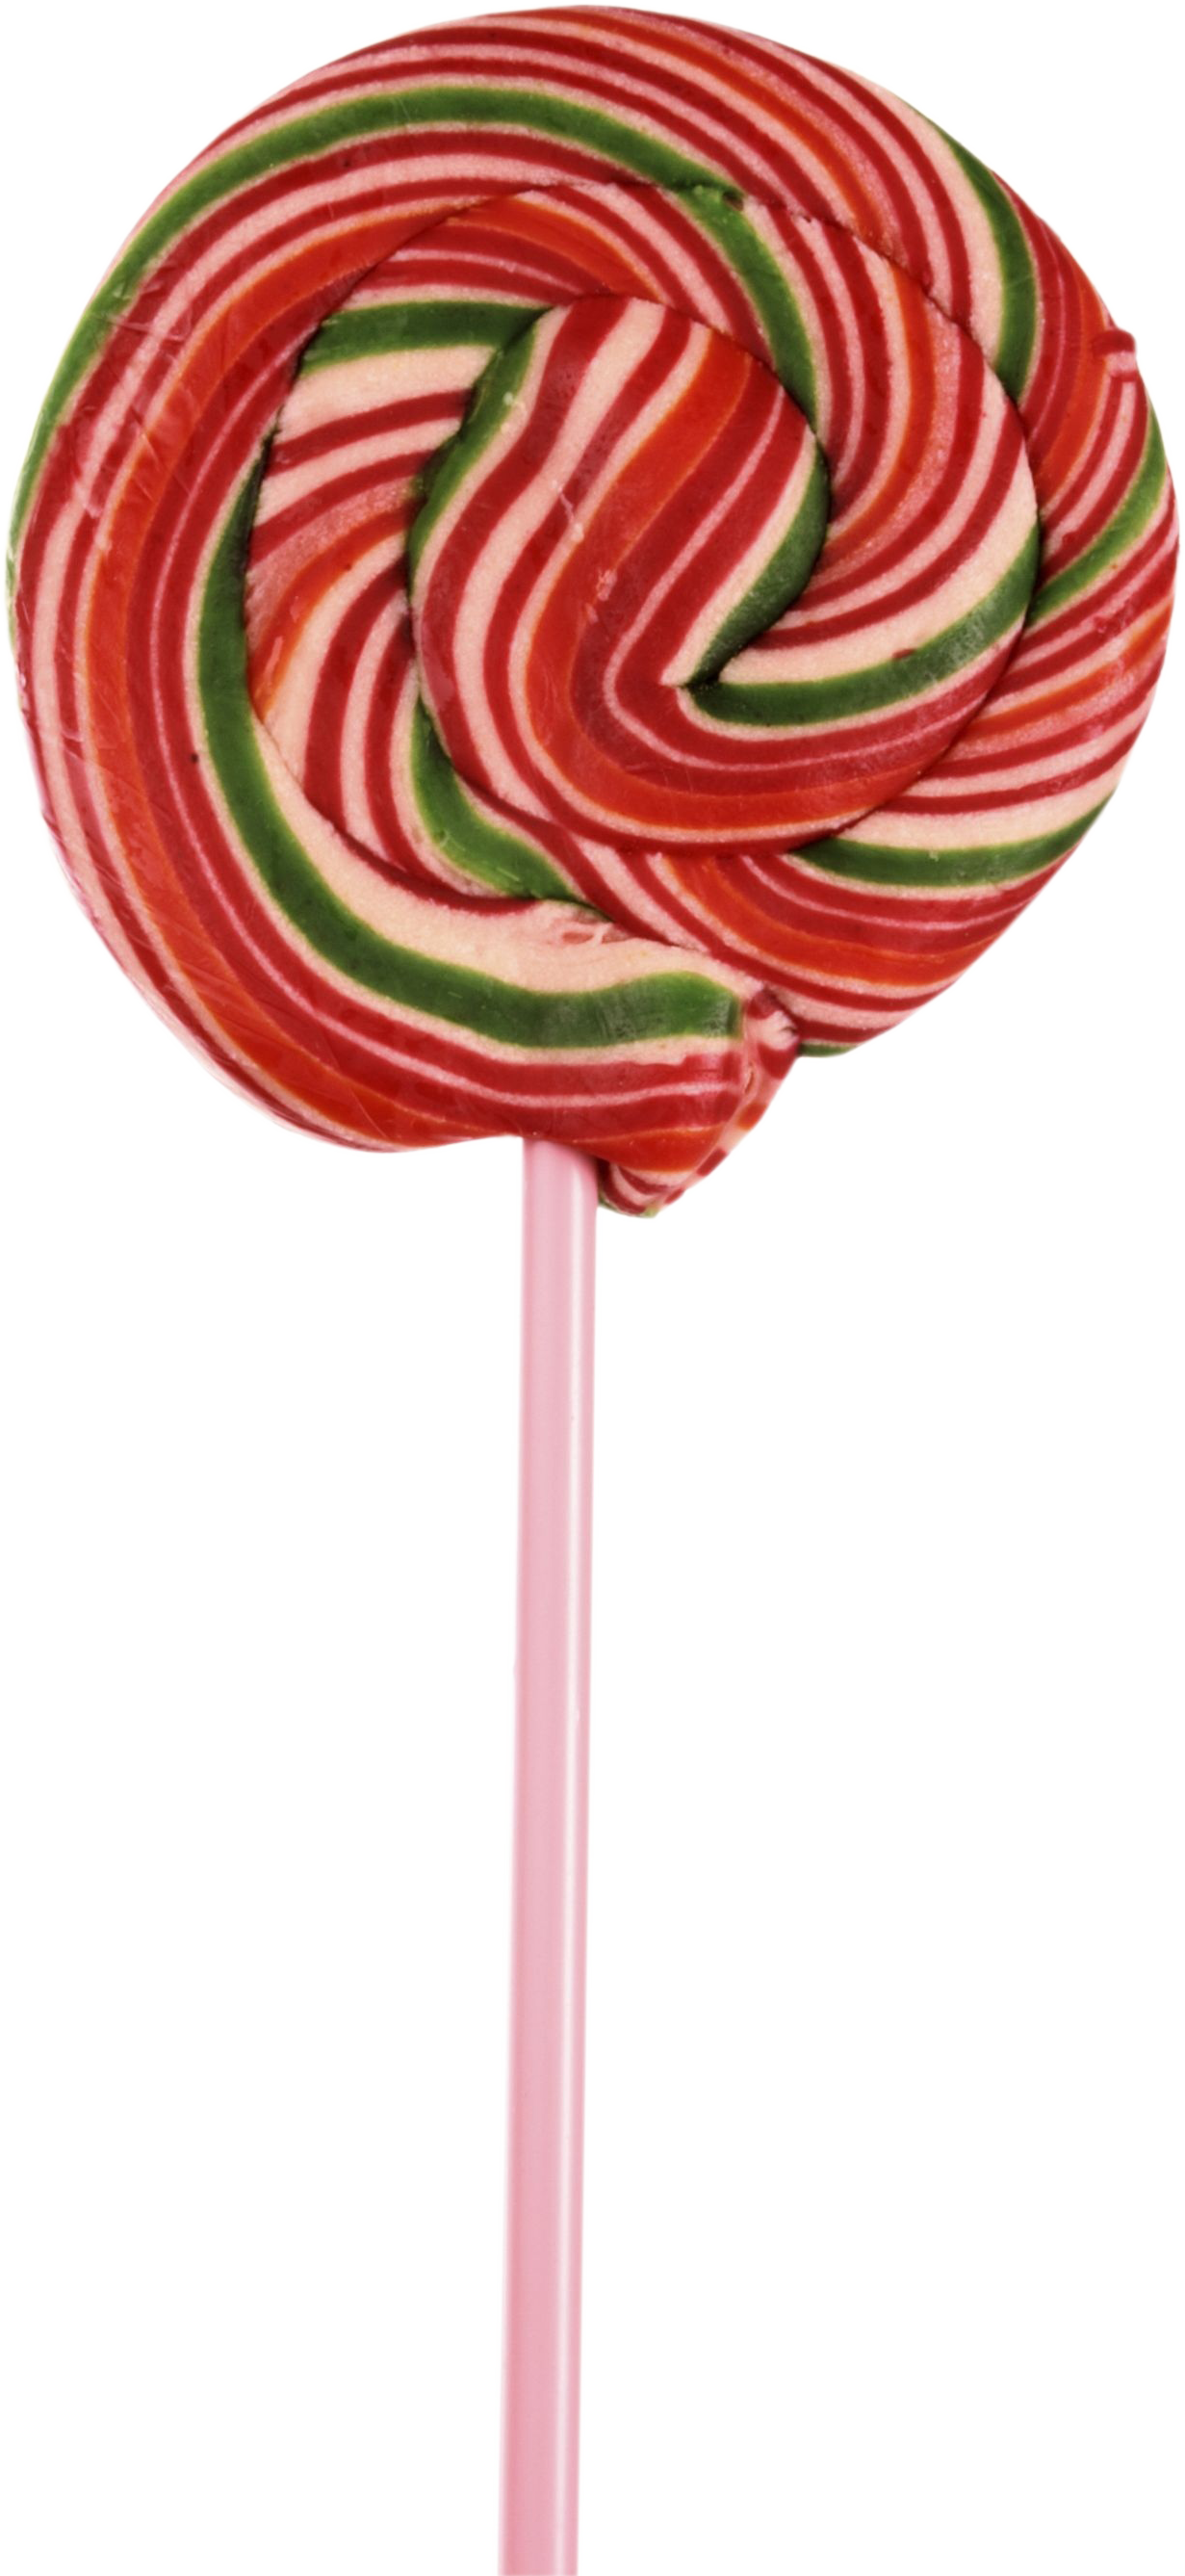 Lollipop Colorful Free HD Image PNG Image